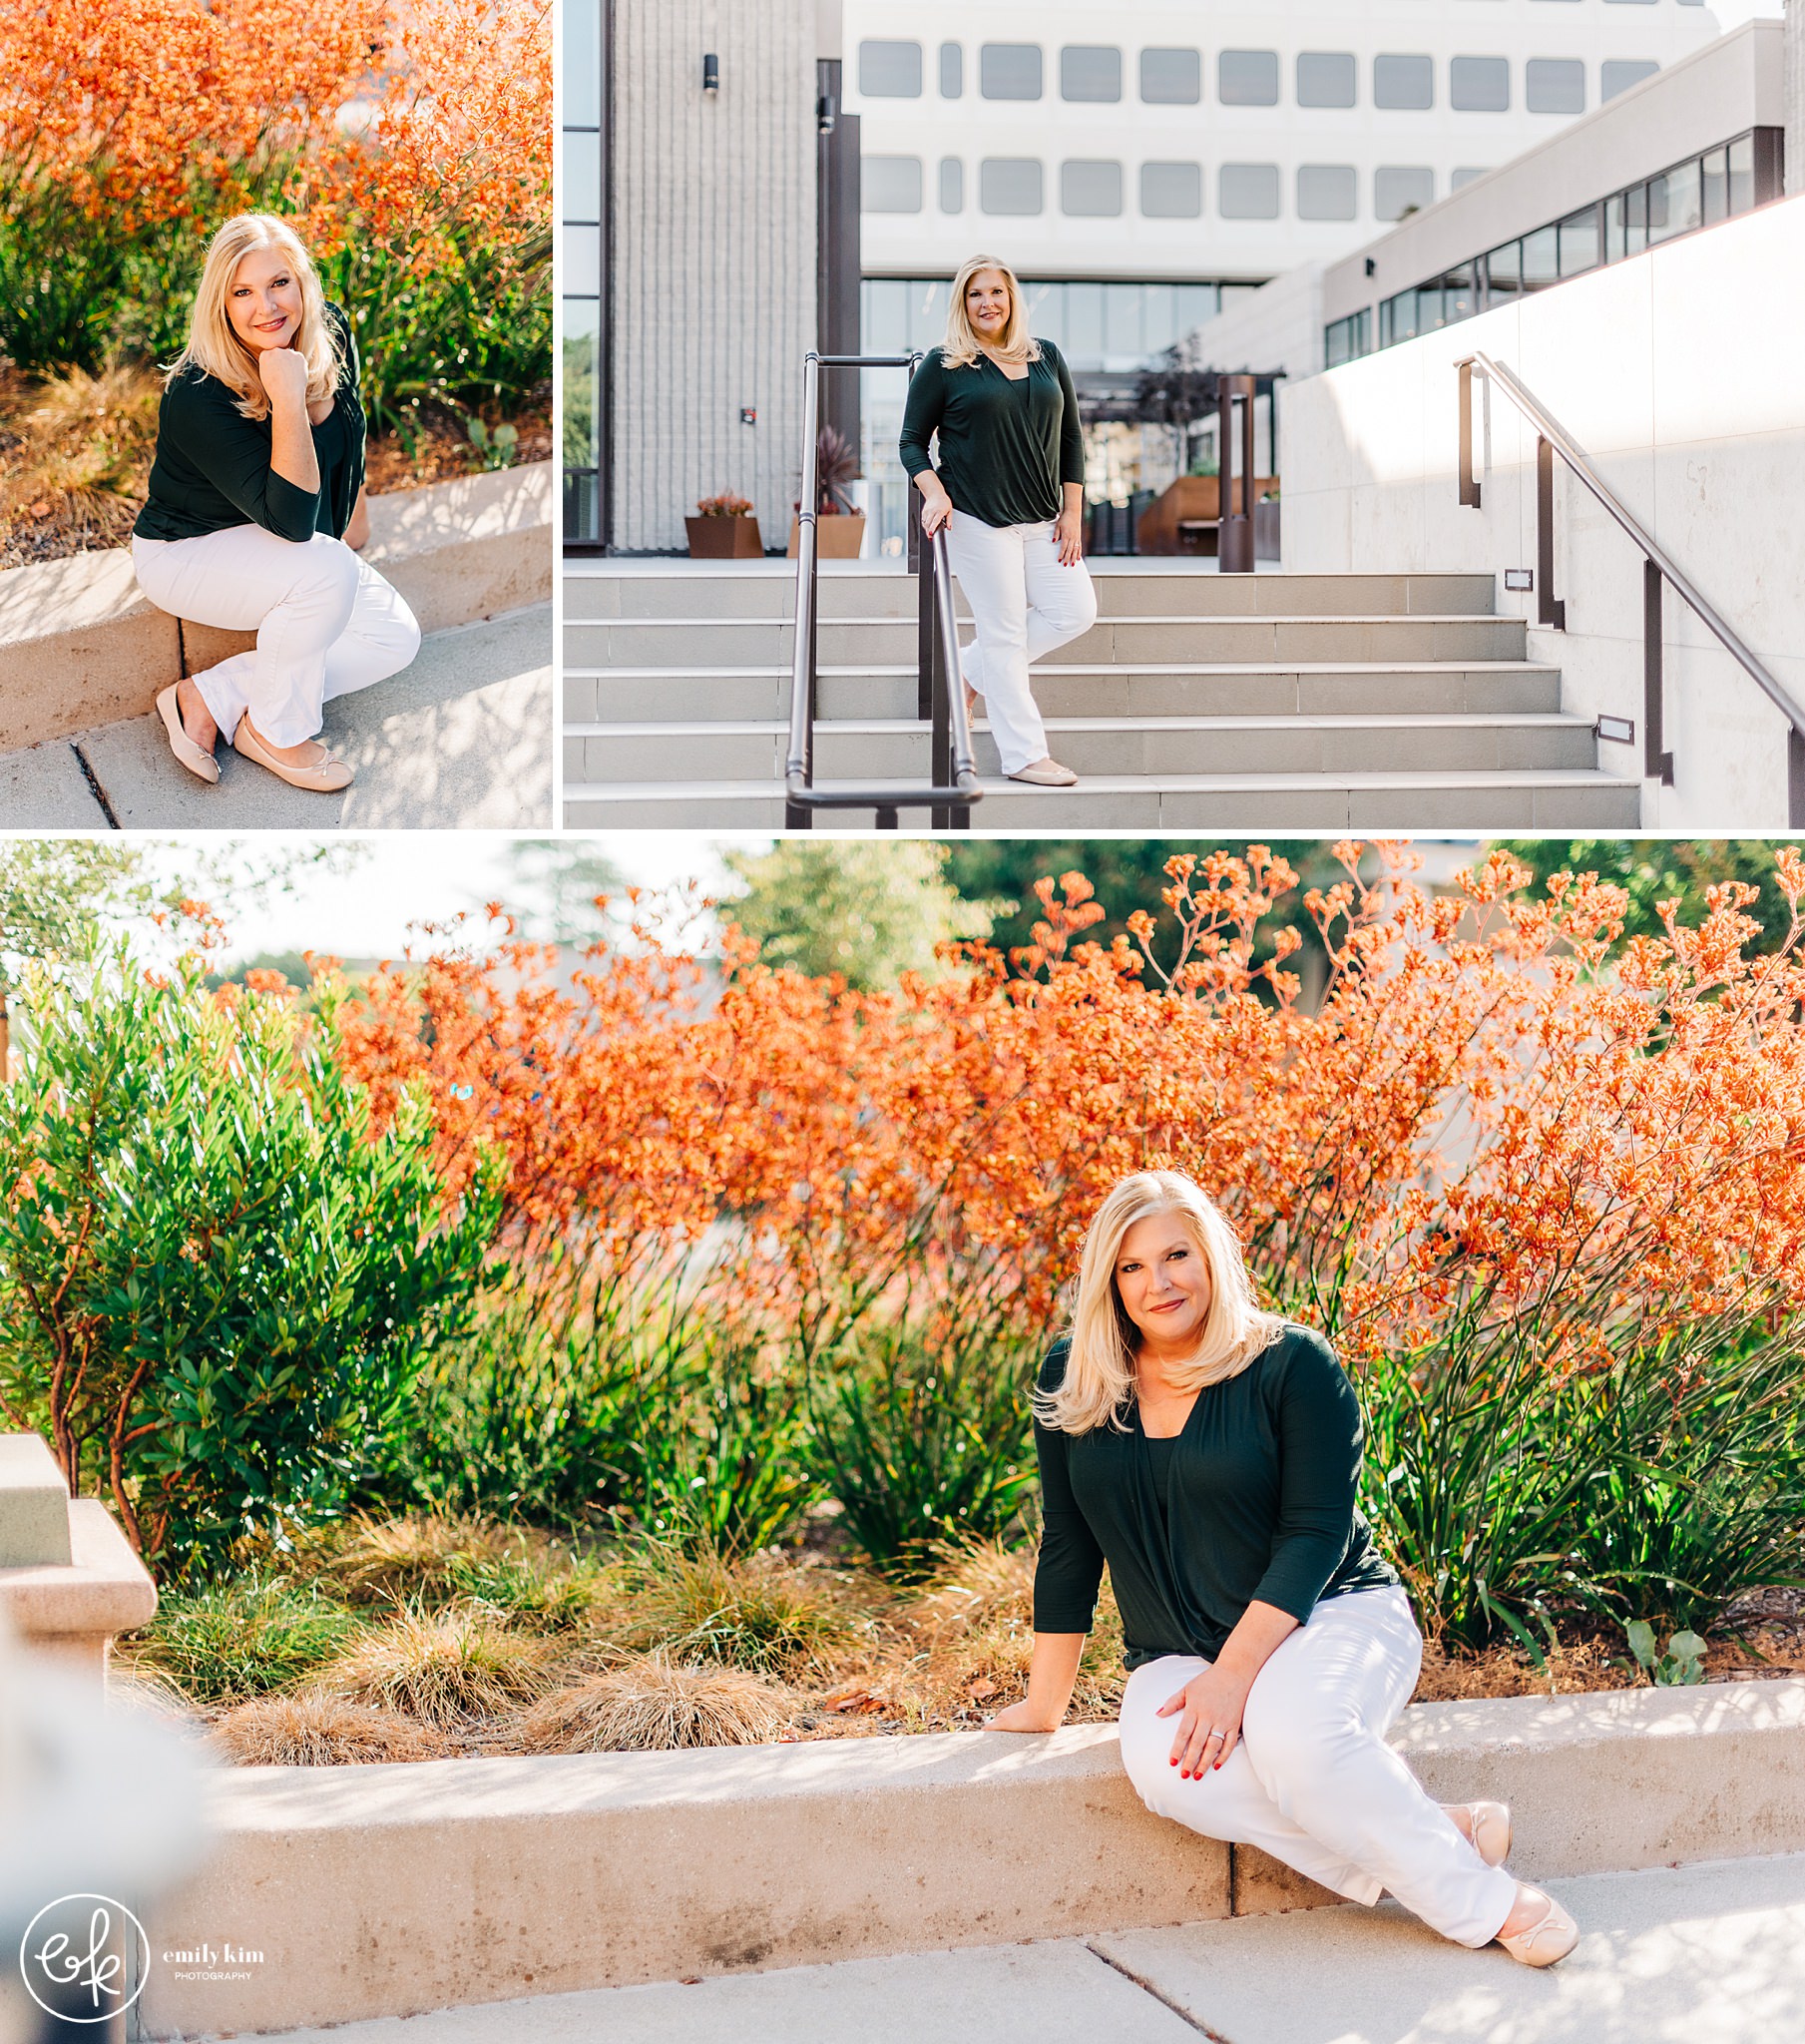 Collage of lifestyle headshots for a female business owner in downtown Mountain View